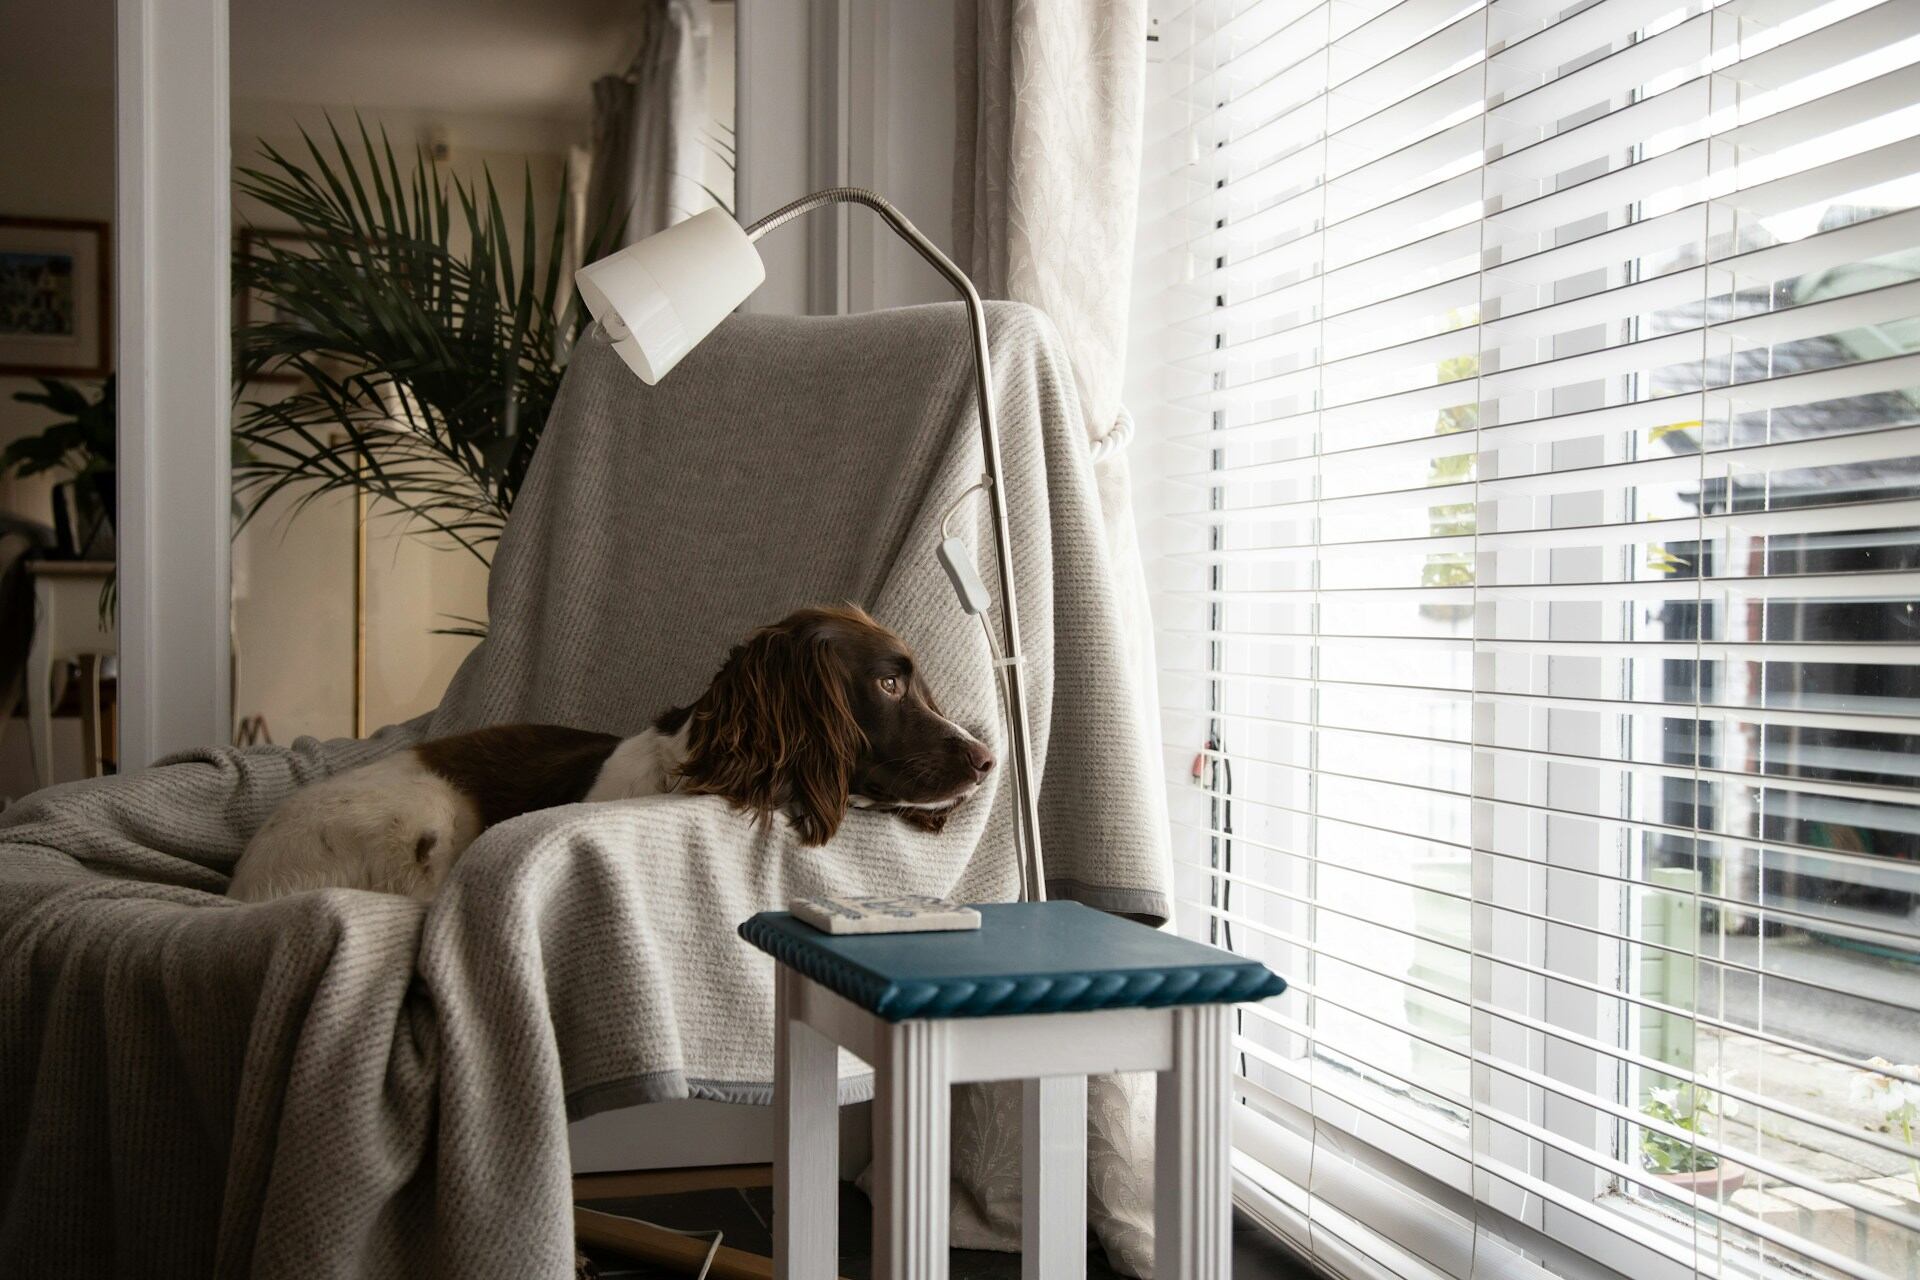 A brown and white dog sitting on a couch by a window